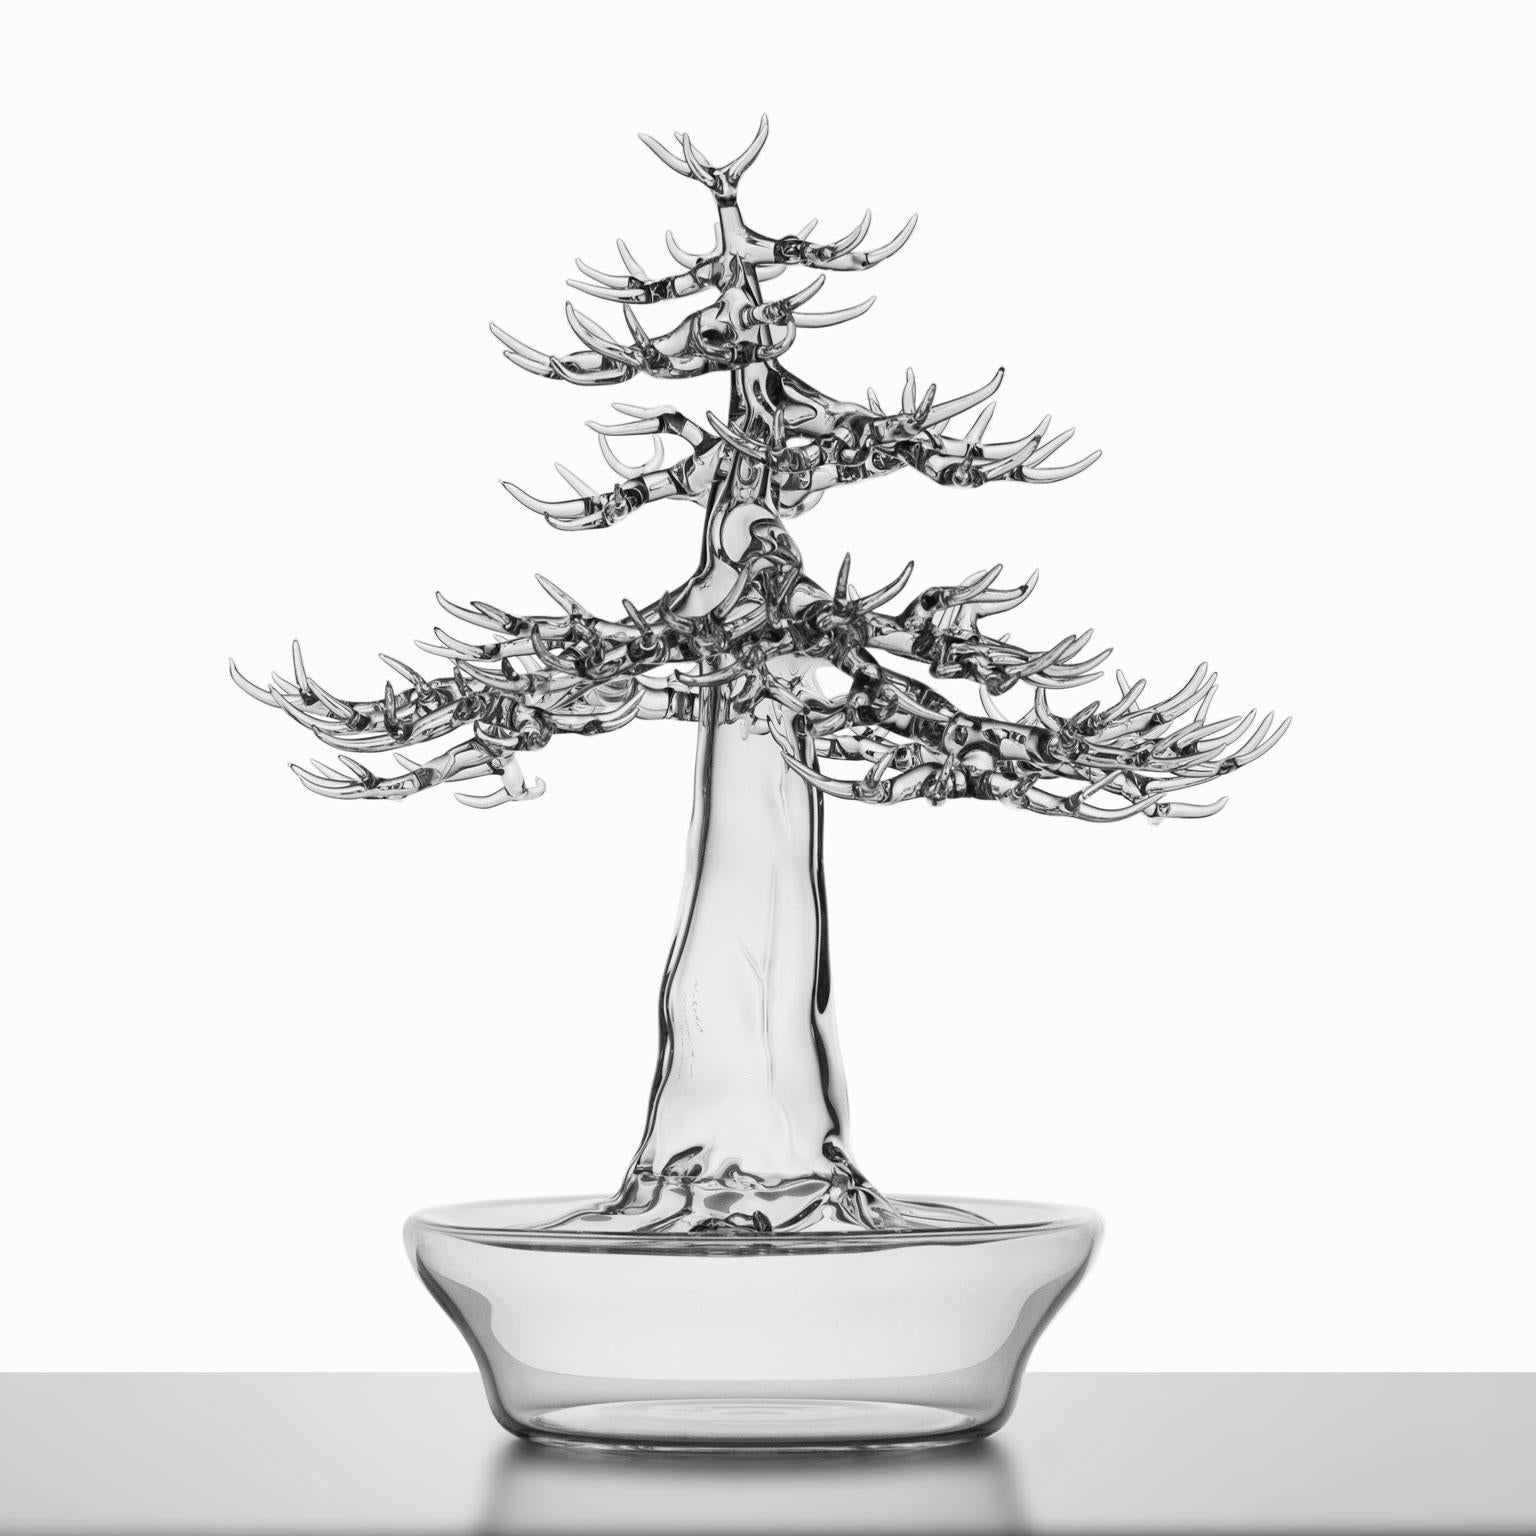 Hand-blown glass sculpture representing a bonsai tree.

Artist: Simone Crestani
Material: Borosilicate glass
Technique: Flameworking
Unique piece
Year: 2022
Measures: Height 15.35'', width 12.59'', depth 12.59'' in
Signed and dated on the trunk.